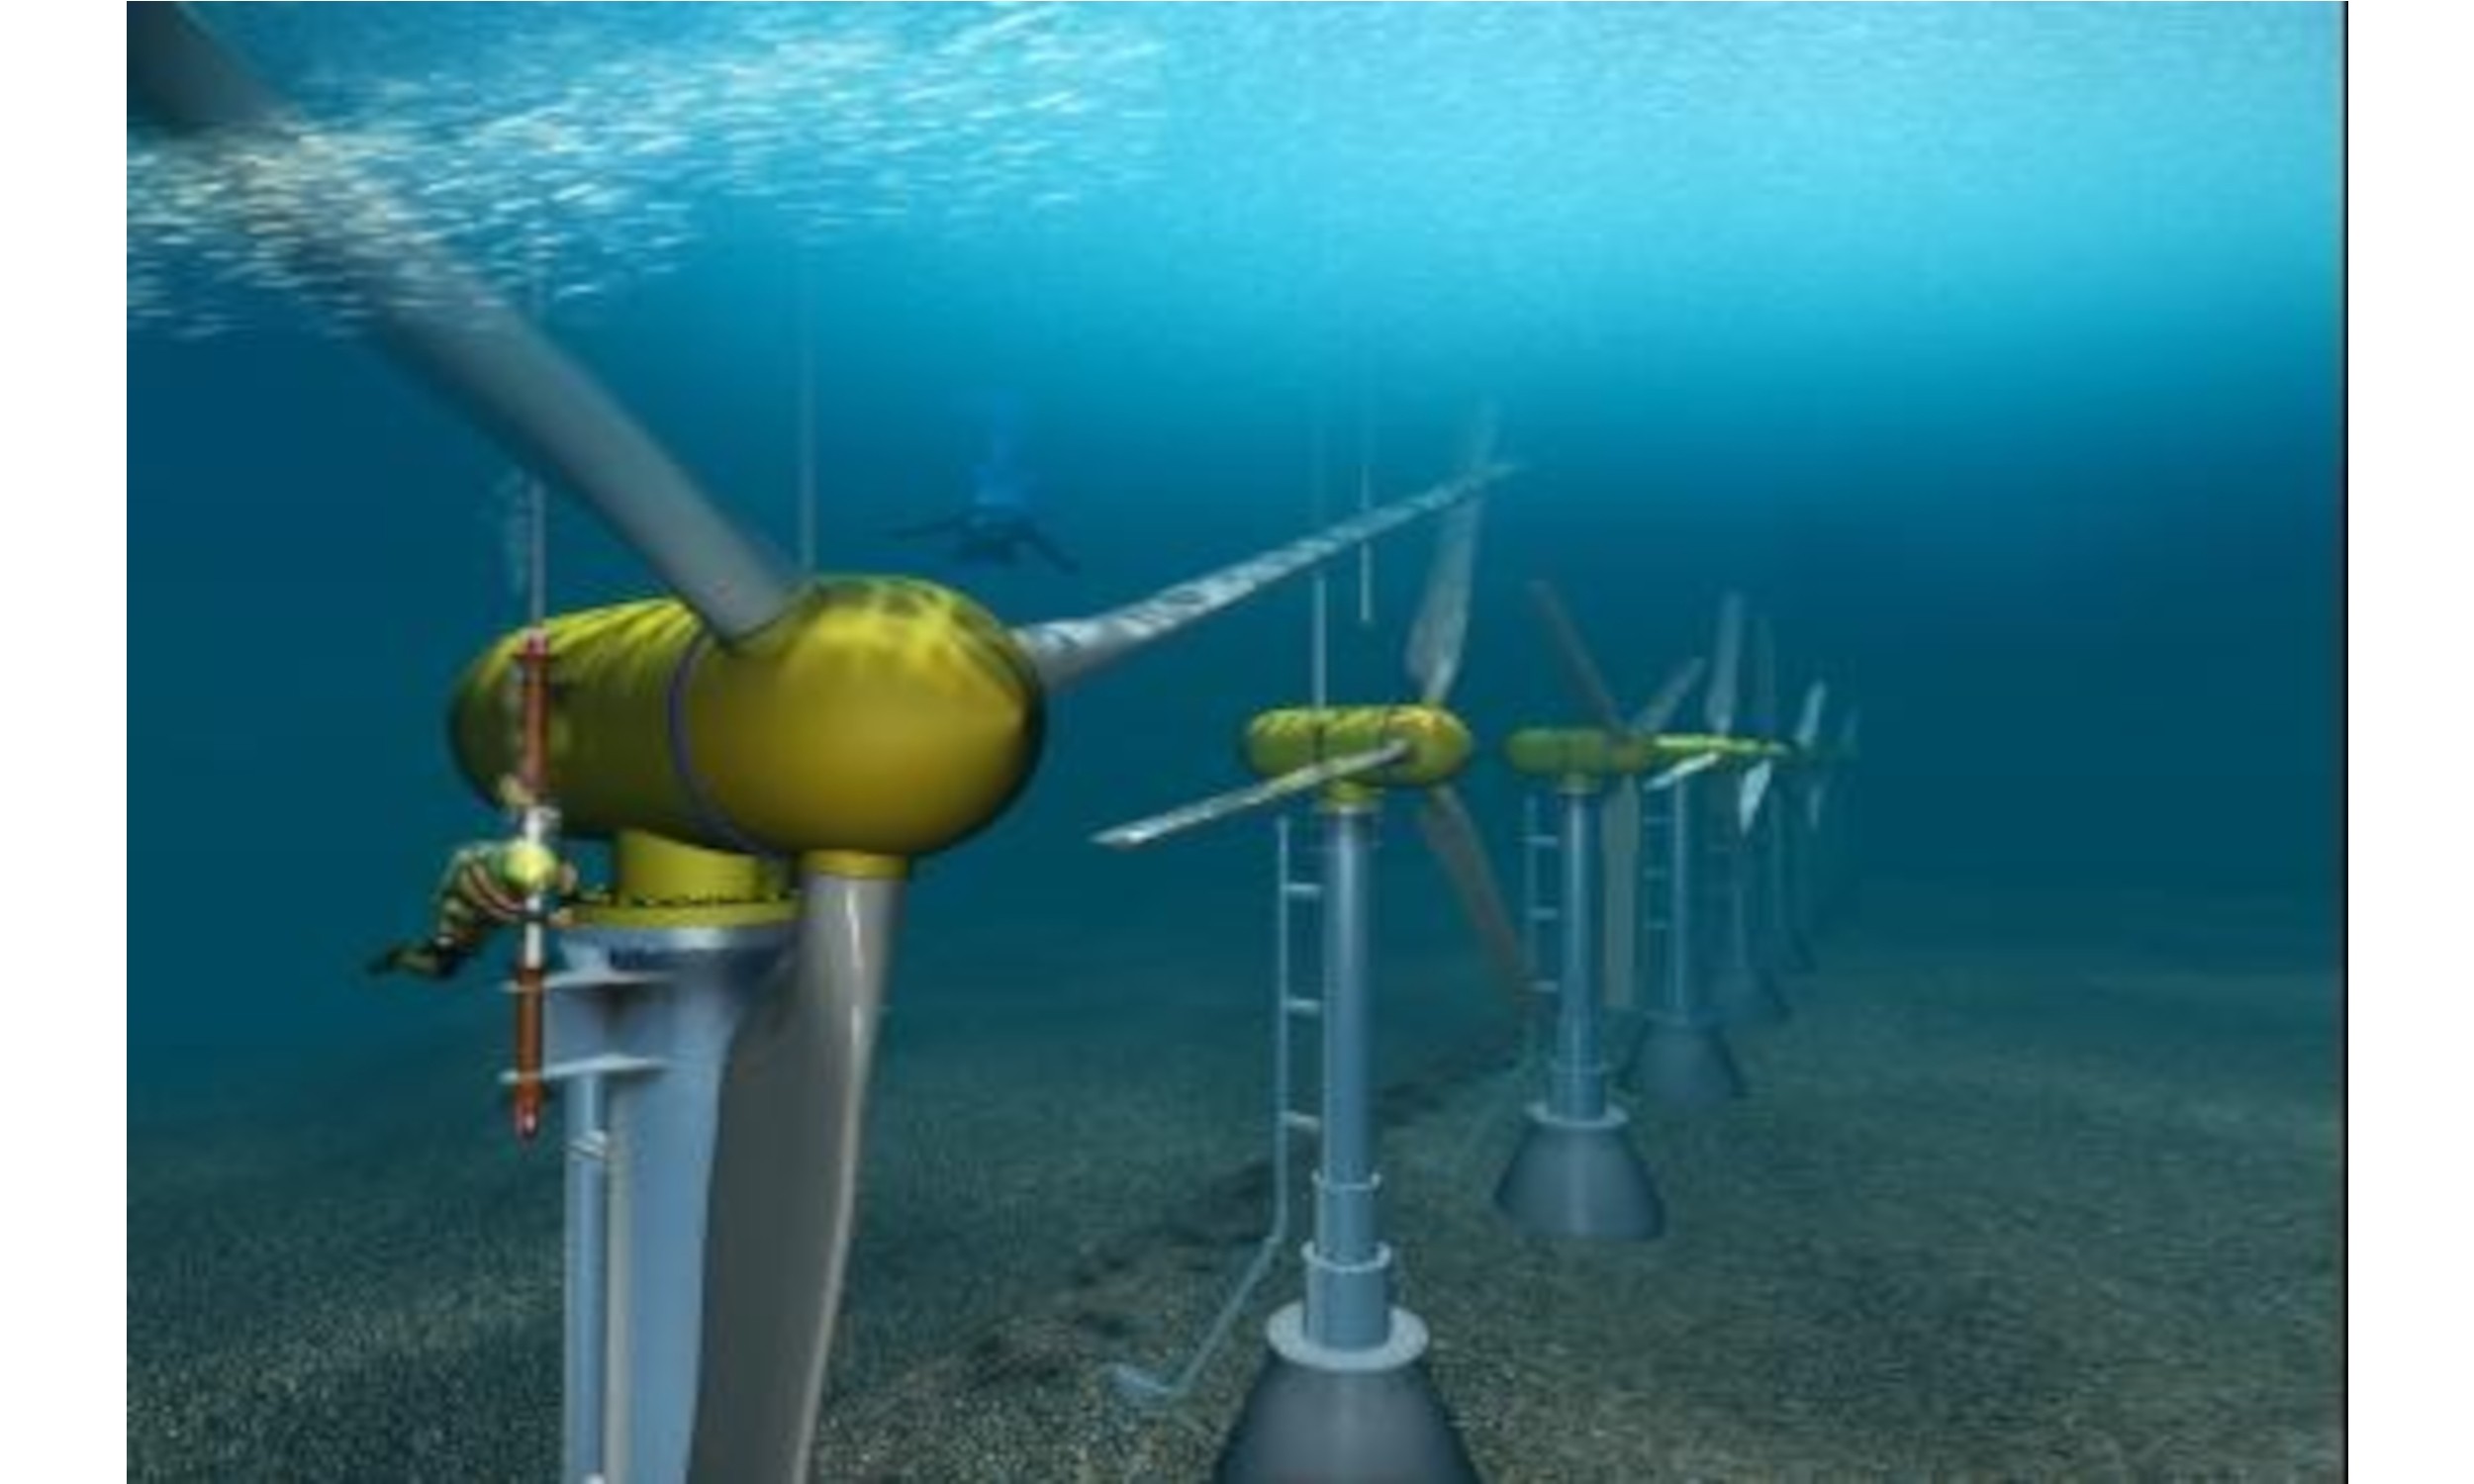 An image of a tidal turbine: an example of an electromechanical system that can be modeled using bond graphs with Simbus Bondgraphs software for MATLAB and Simulink.